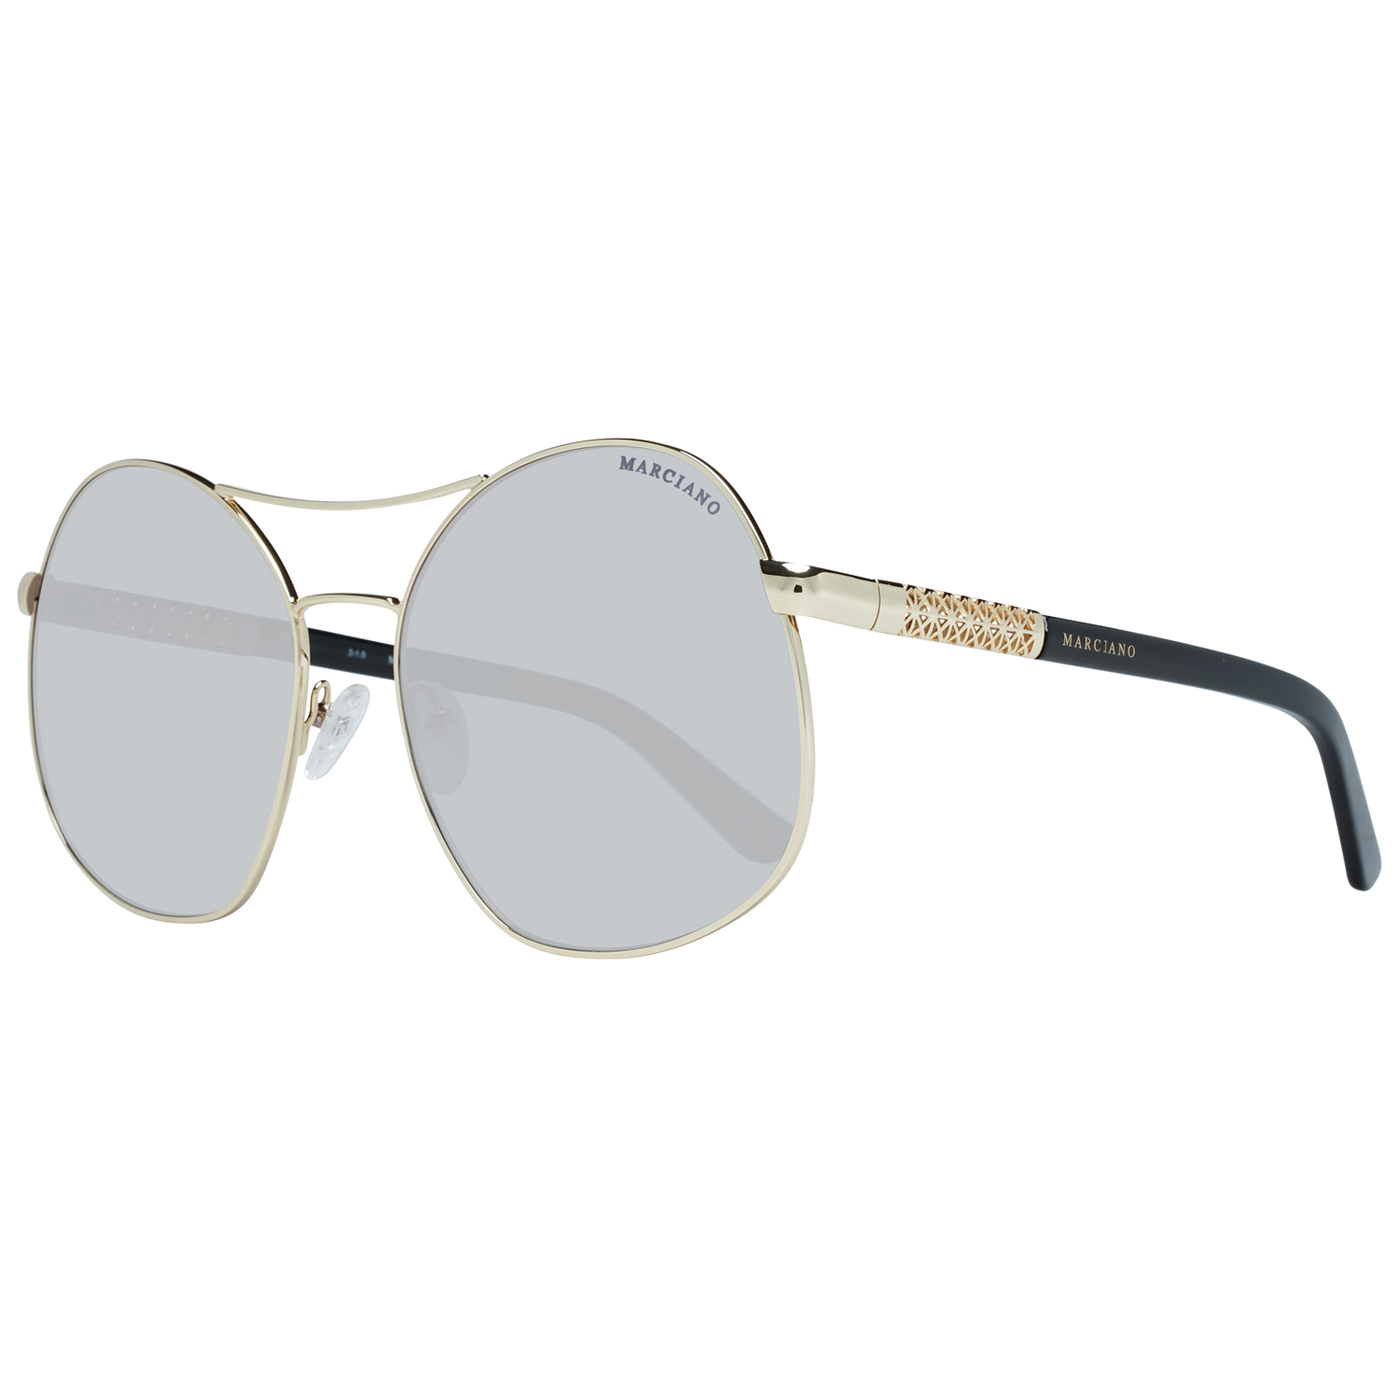 Marciano by Guess Gold Women Sunglasses